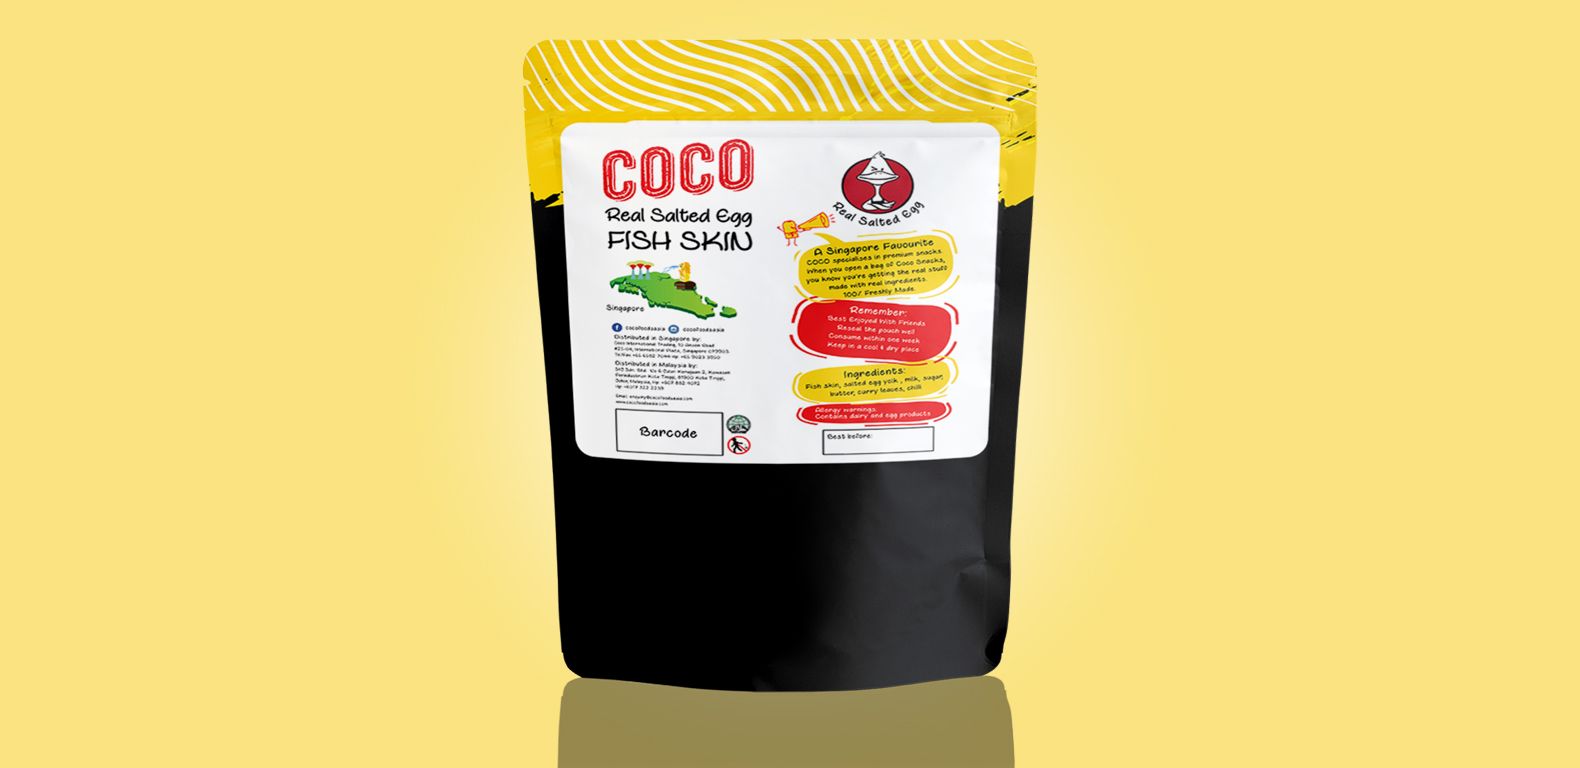 Packaging-Design-Coco-Salted-Fish-Skin-Back-